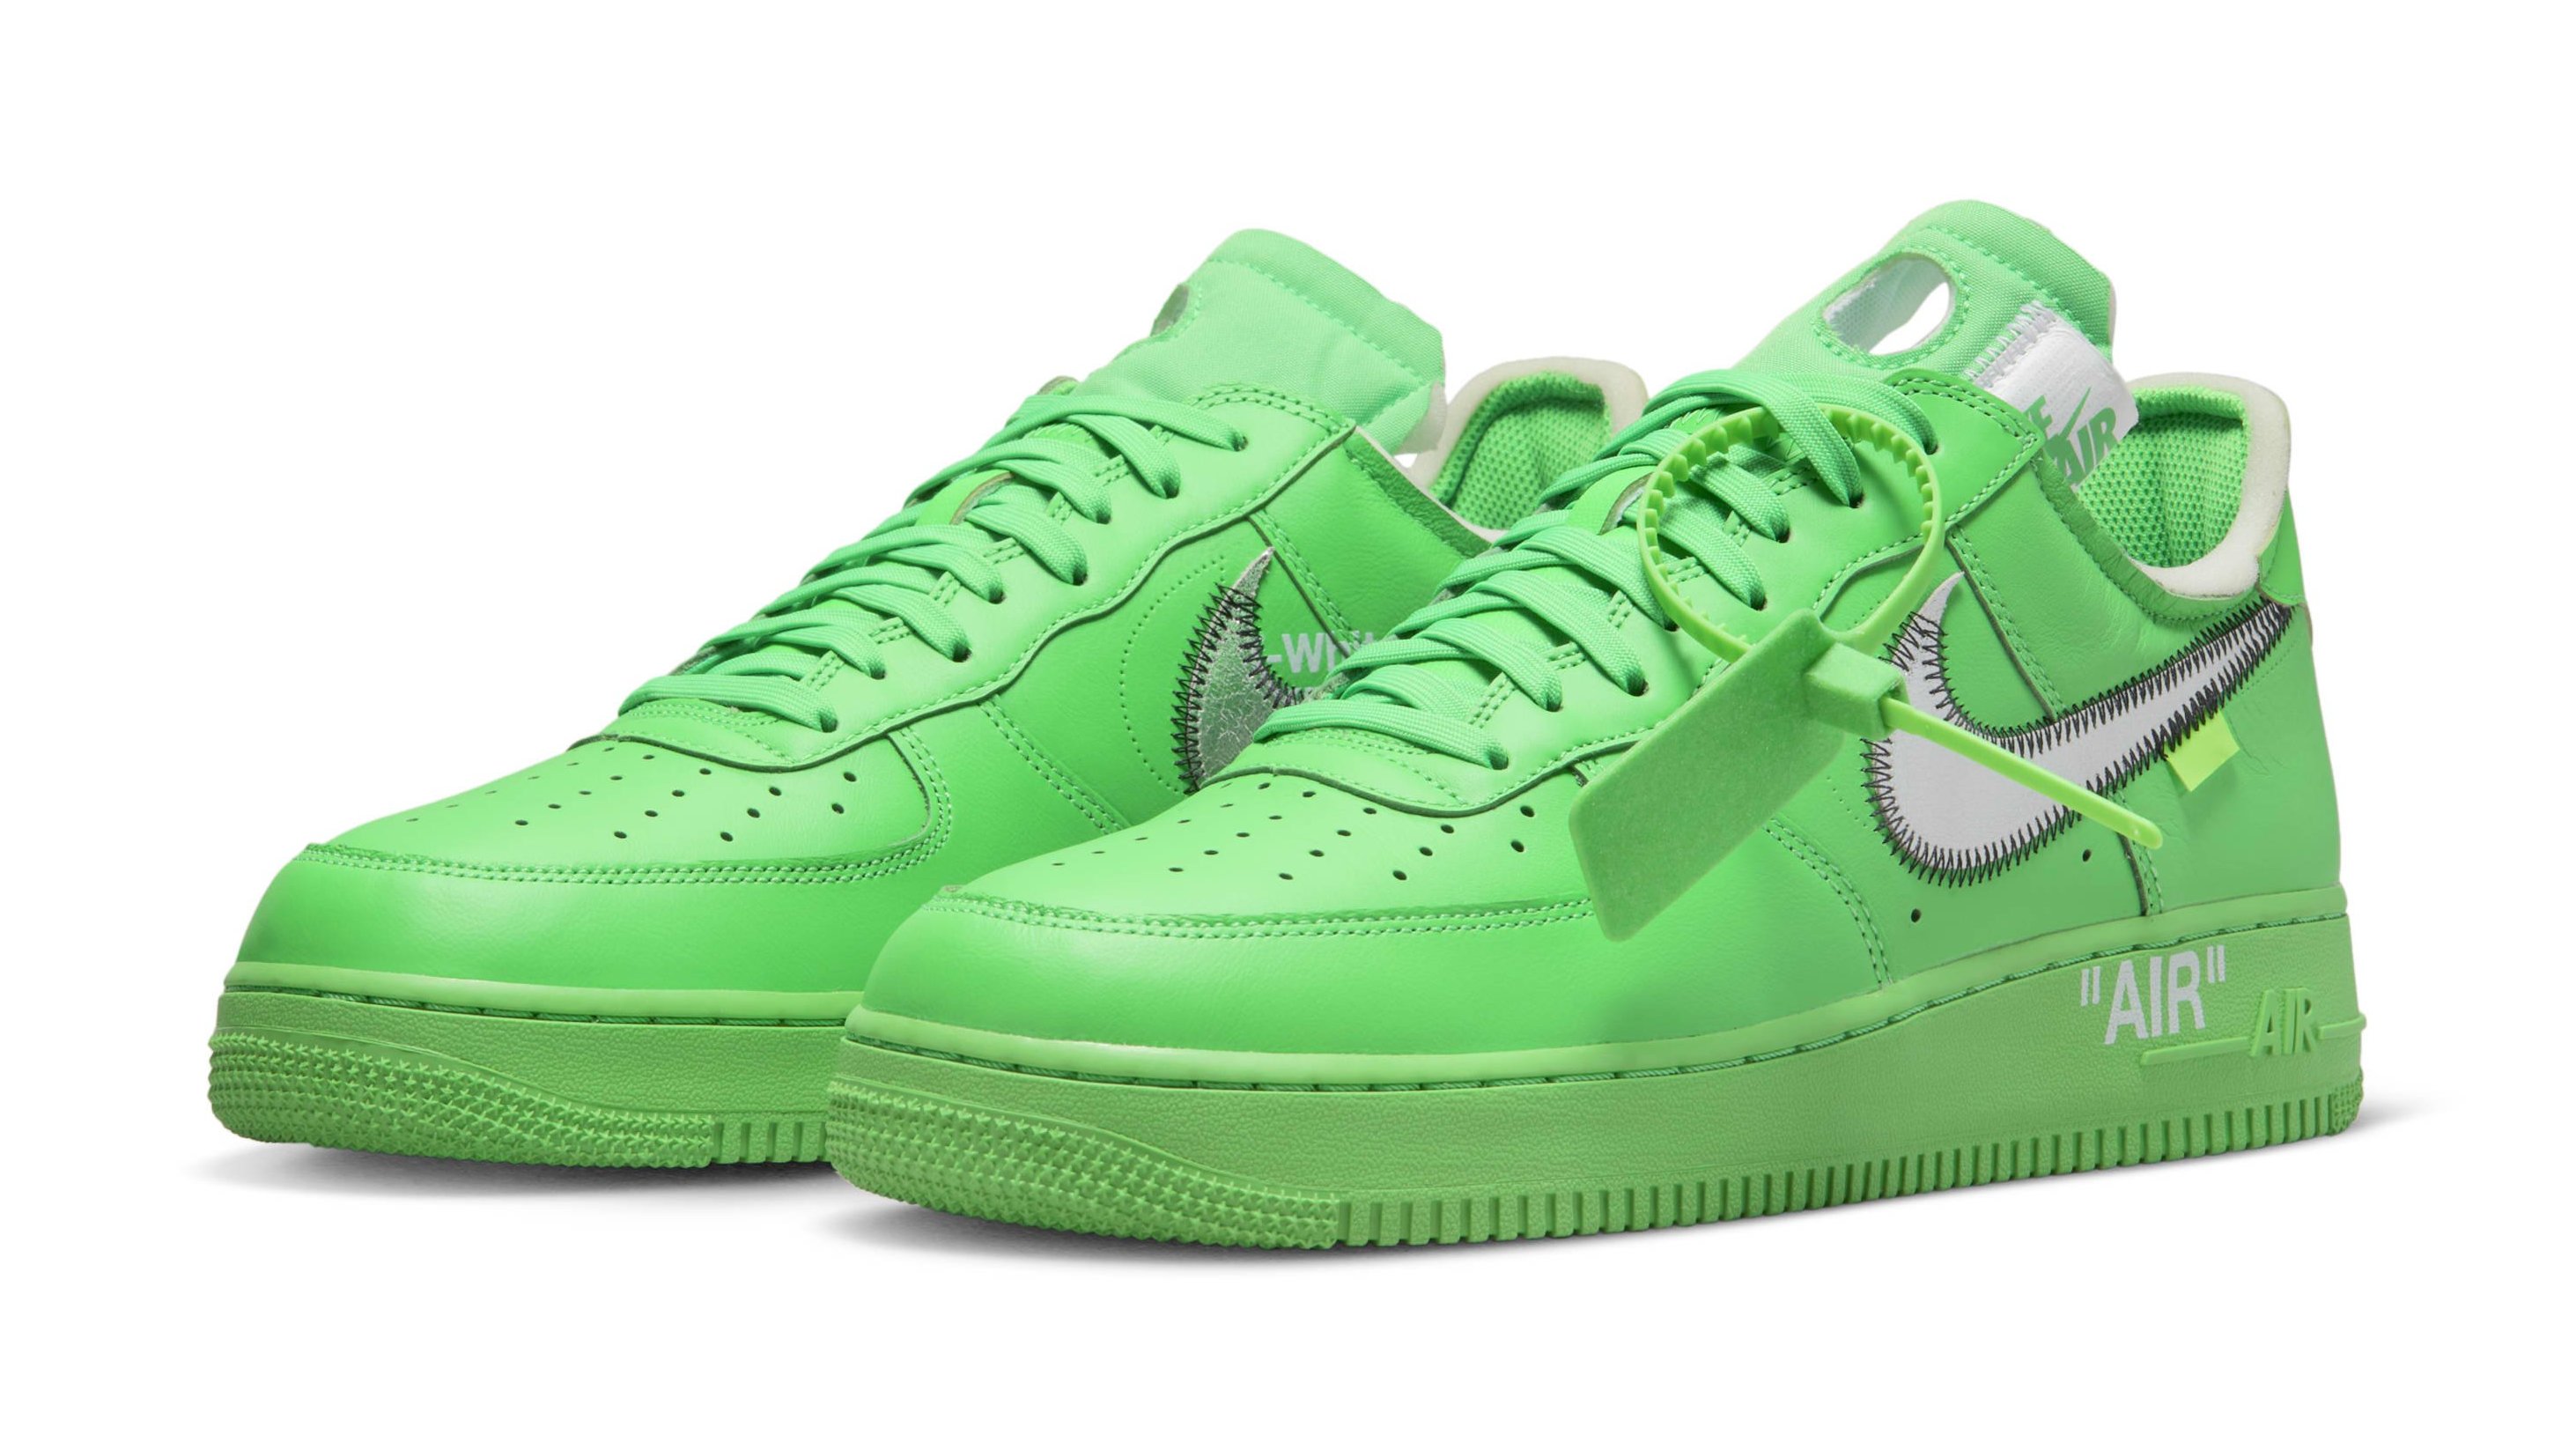 The Nike Air Force 1 Low NYC Is Releasing This Weekend